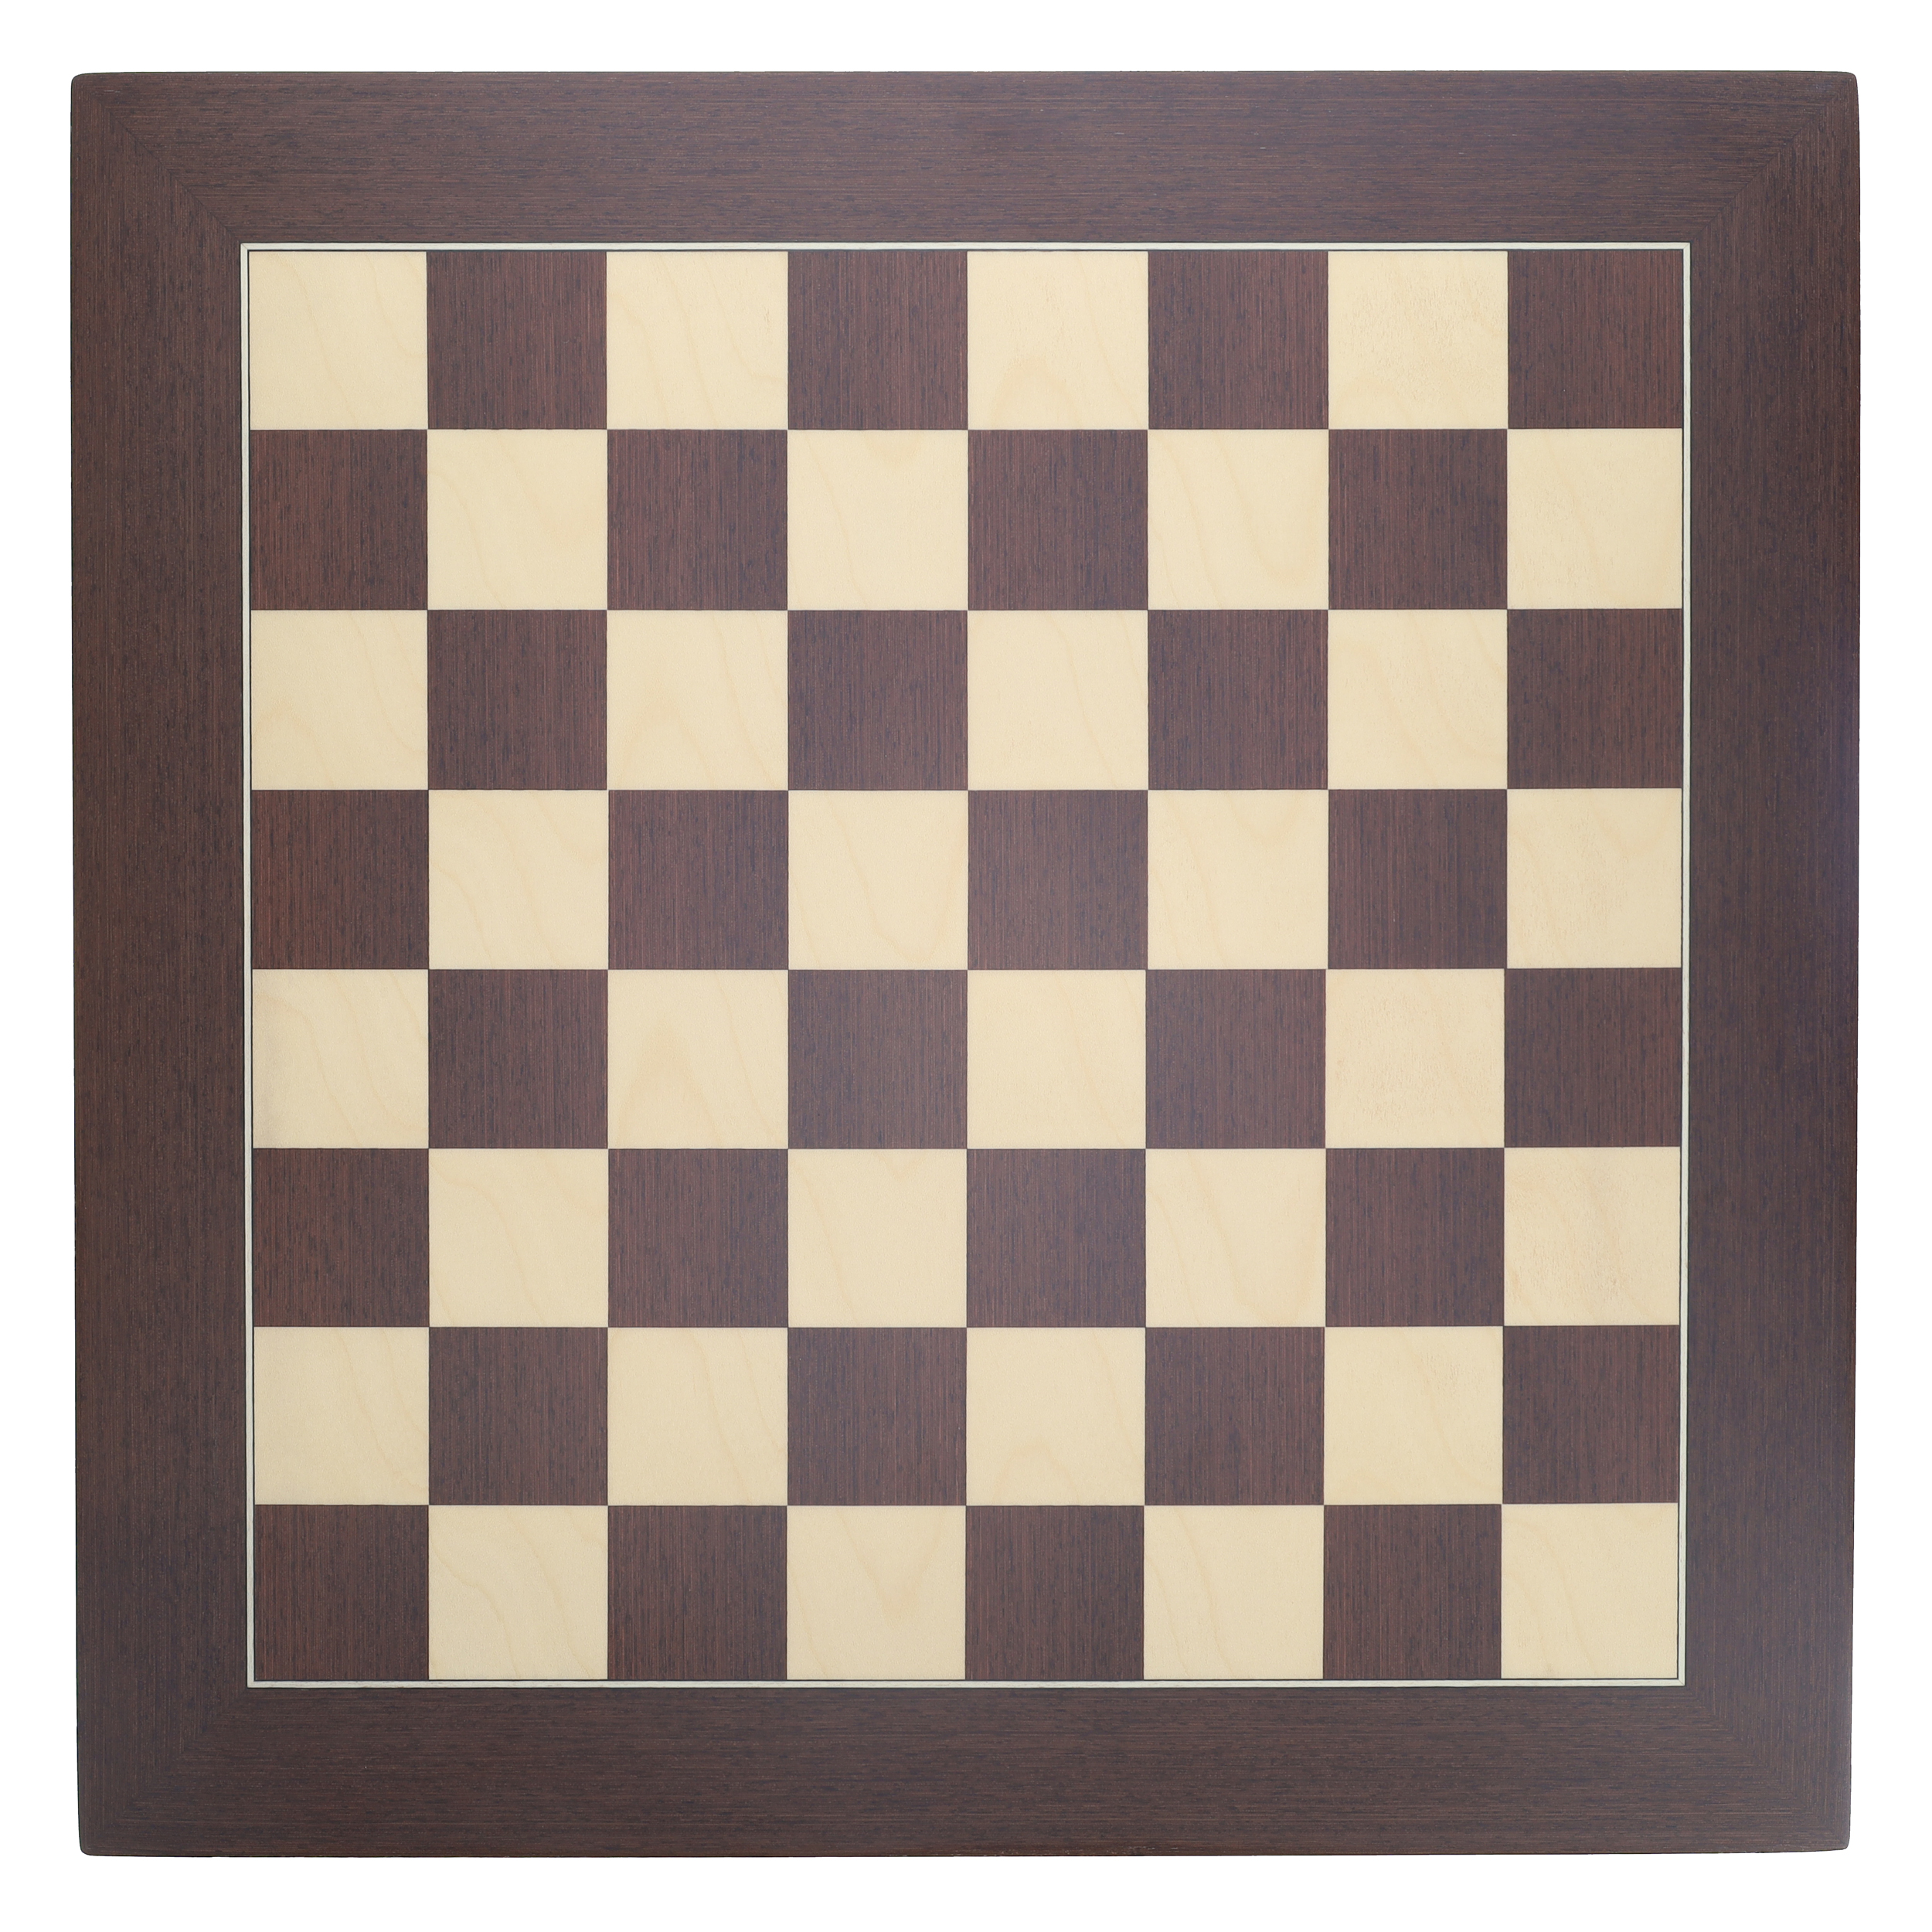 Bobby Fischer® Ultimate Chess Set with Deluxe Wooden Chess Board